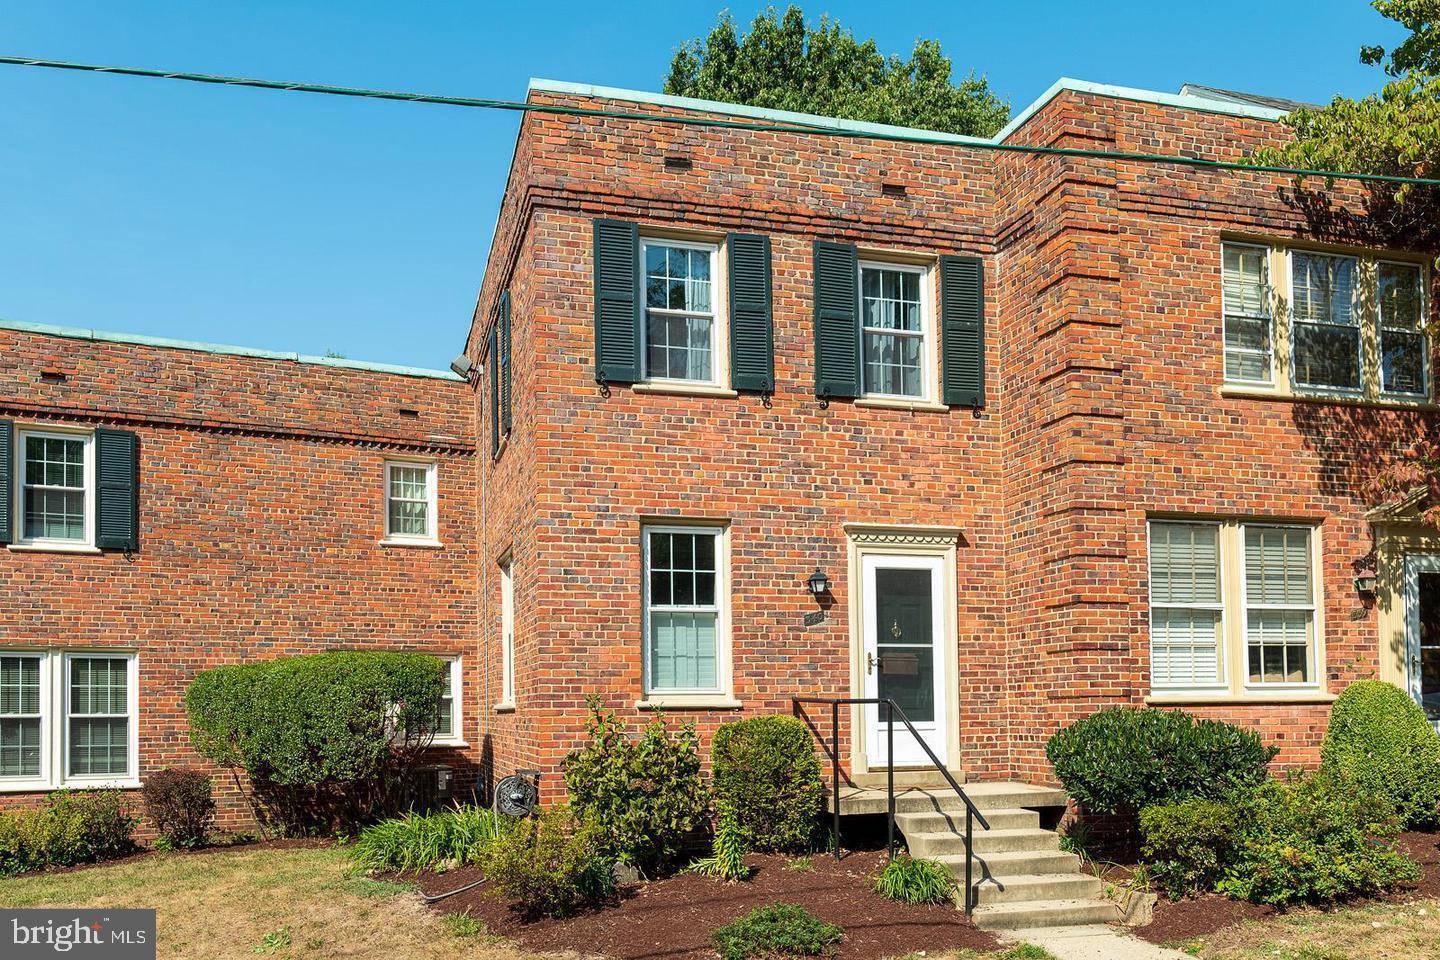 front view of a brick house